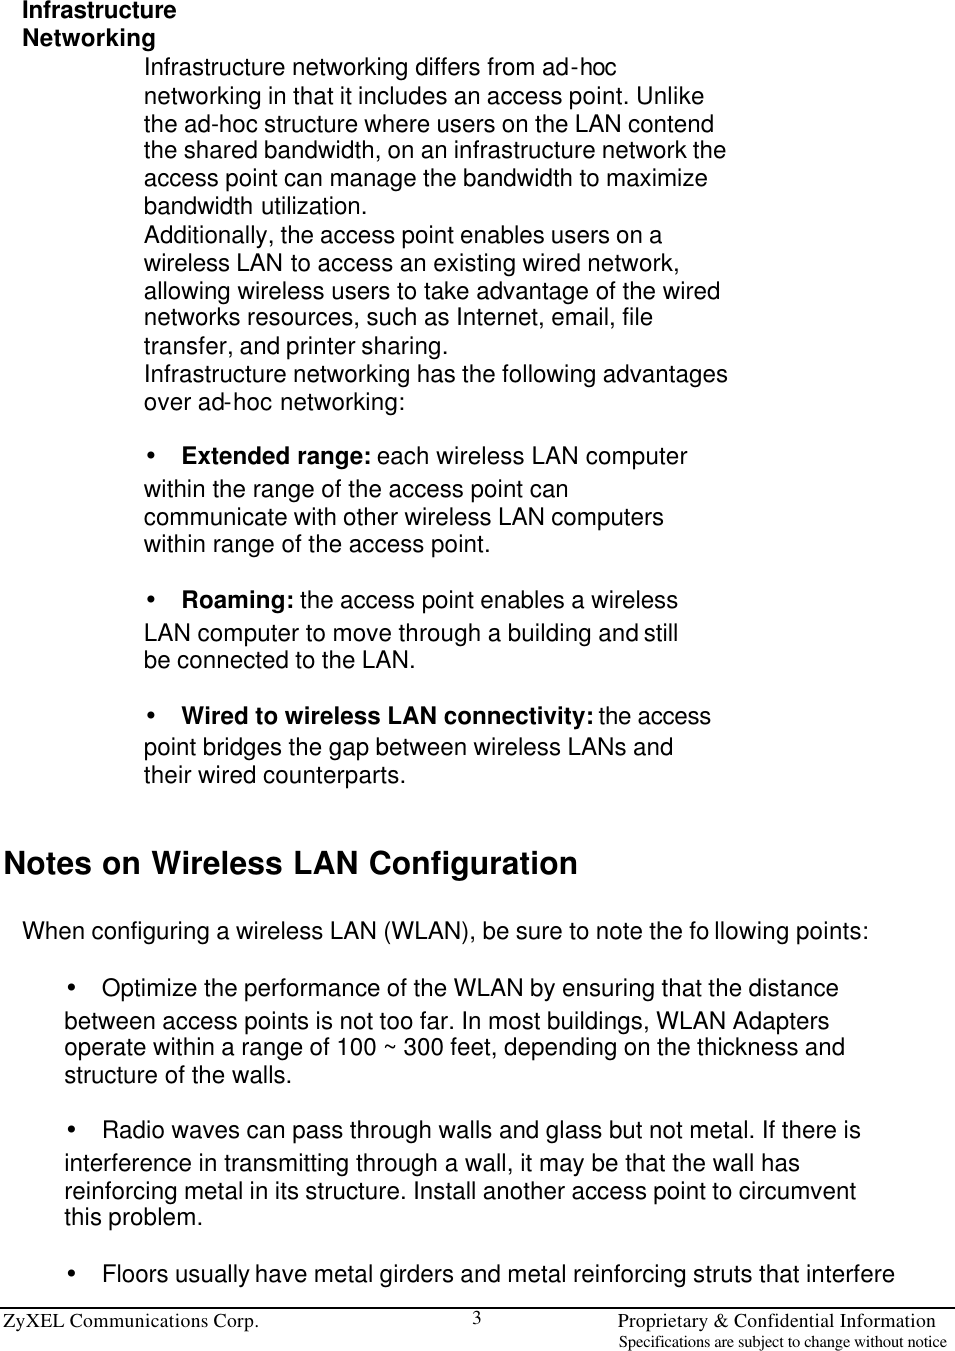  ZyXEL Communications Corp.                                                                       Proprietary &amp; Confidential Information                                                                                                                           Specifications are subject to change without notice 3  Infrastructure Networking Infrastructure networking differs from ad-hoc networking in that it includes an access point. Unlike the ad-hoc structure where users on the LAN contend the shared bandwidth, on an infrastructure network the access point can manage the bandwidth to maximize bandwidth utilization. Additionally, the access point enables users on a wireless LAN to access an existing wired network, allowing wireless users to take advantage of the wired networks resources, such as Internet, email, file transfer, and printer sharing. Infrastructure networking has the following advantages over ad-hoc networking:  • Extended range: each wireless LAN computer within the range of the access point can communicate with other wireless LAN computers within range of the access point.  • Roaming: the access point enables a wireless LAN computer to move through a building and still be connected to the LAN.  • Wired to wireless LAN connectivity: the access point bridges the gap between wireless LANs and their wired counterparts.   Notes on Wireless LAN Configuration  When configuring a wireless LAN (WLAN), be sure to note the fo llowing points:  • Optimize the performance of the WLAN by ensuring that the distance between access points is not too far. In most buildings, WLAN Adapters operate within a range of 100 ~ 300 feet, depending on the thickness and structure of the walls.  • Radio waves can pass through walls and glass but not metal. If there is interference in transmitting through a wall, it may be that the wall has reinforcing metal in its structure. Install another access point to circumvent this problem.  • Floors usually have metal girders and metal reinforcing struts that interfere 